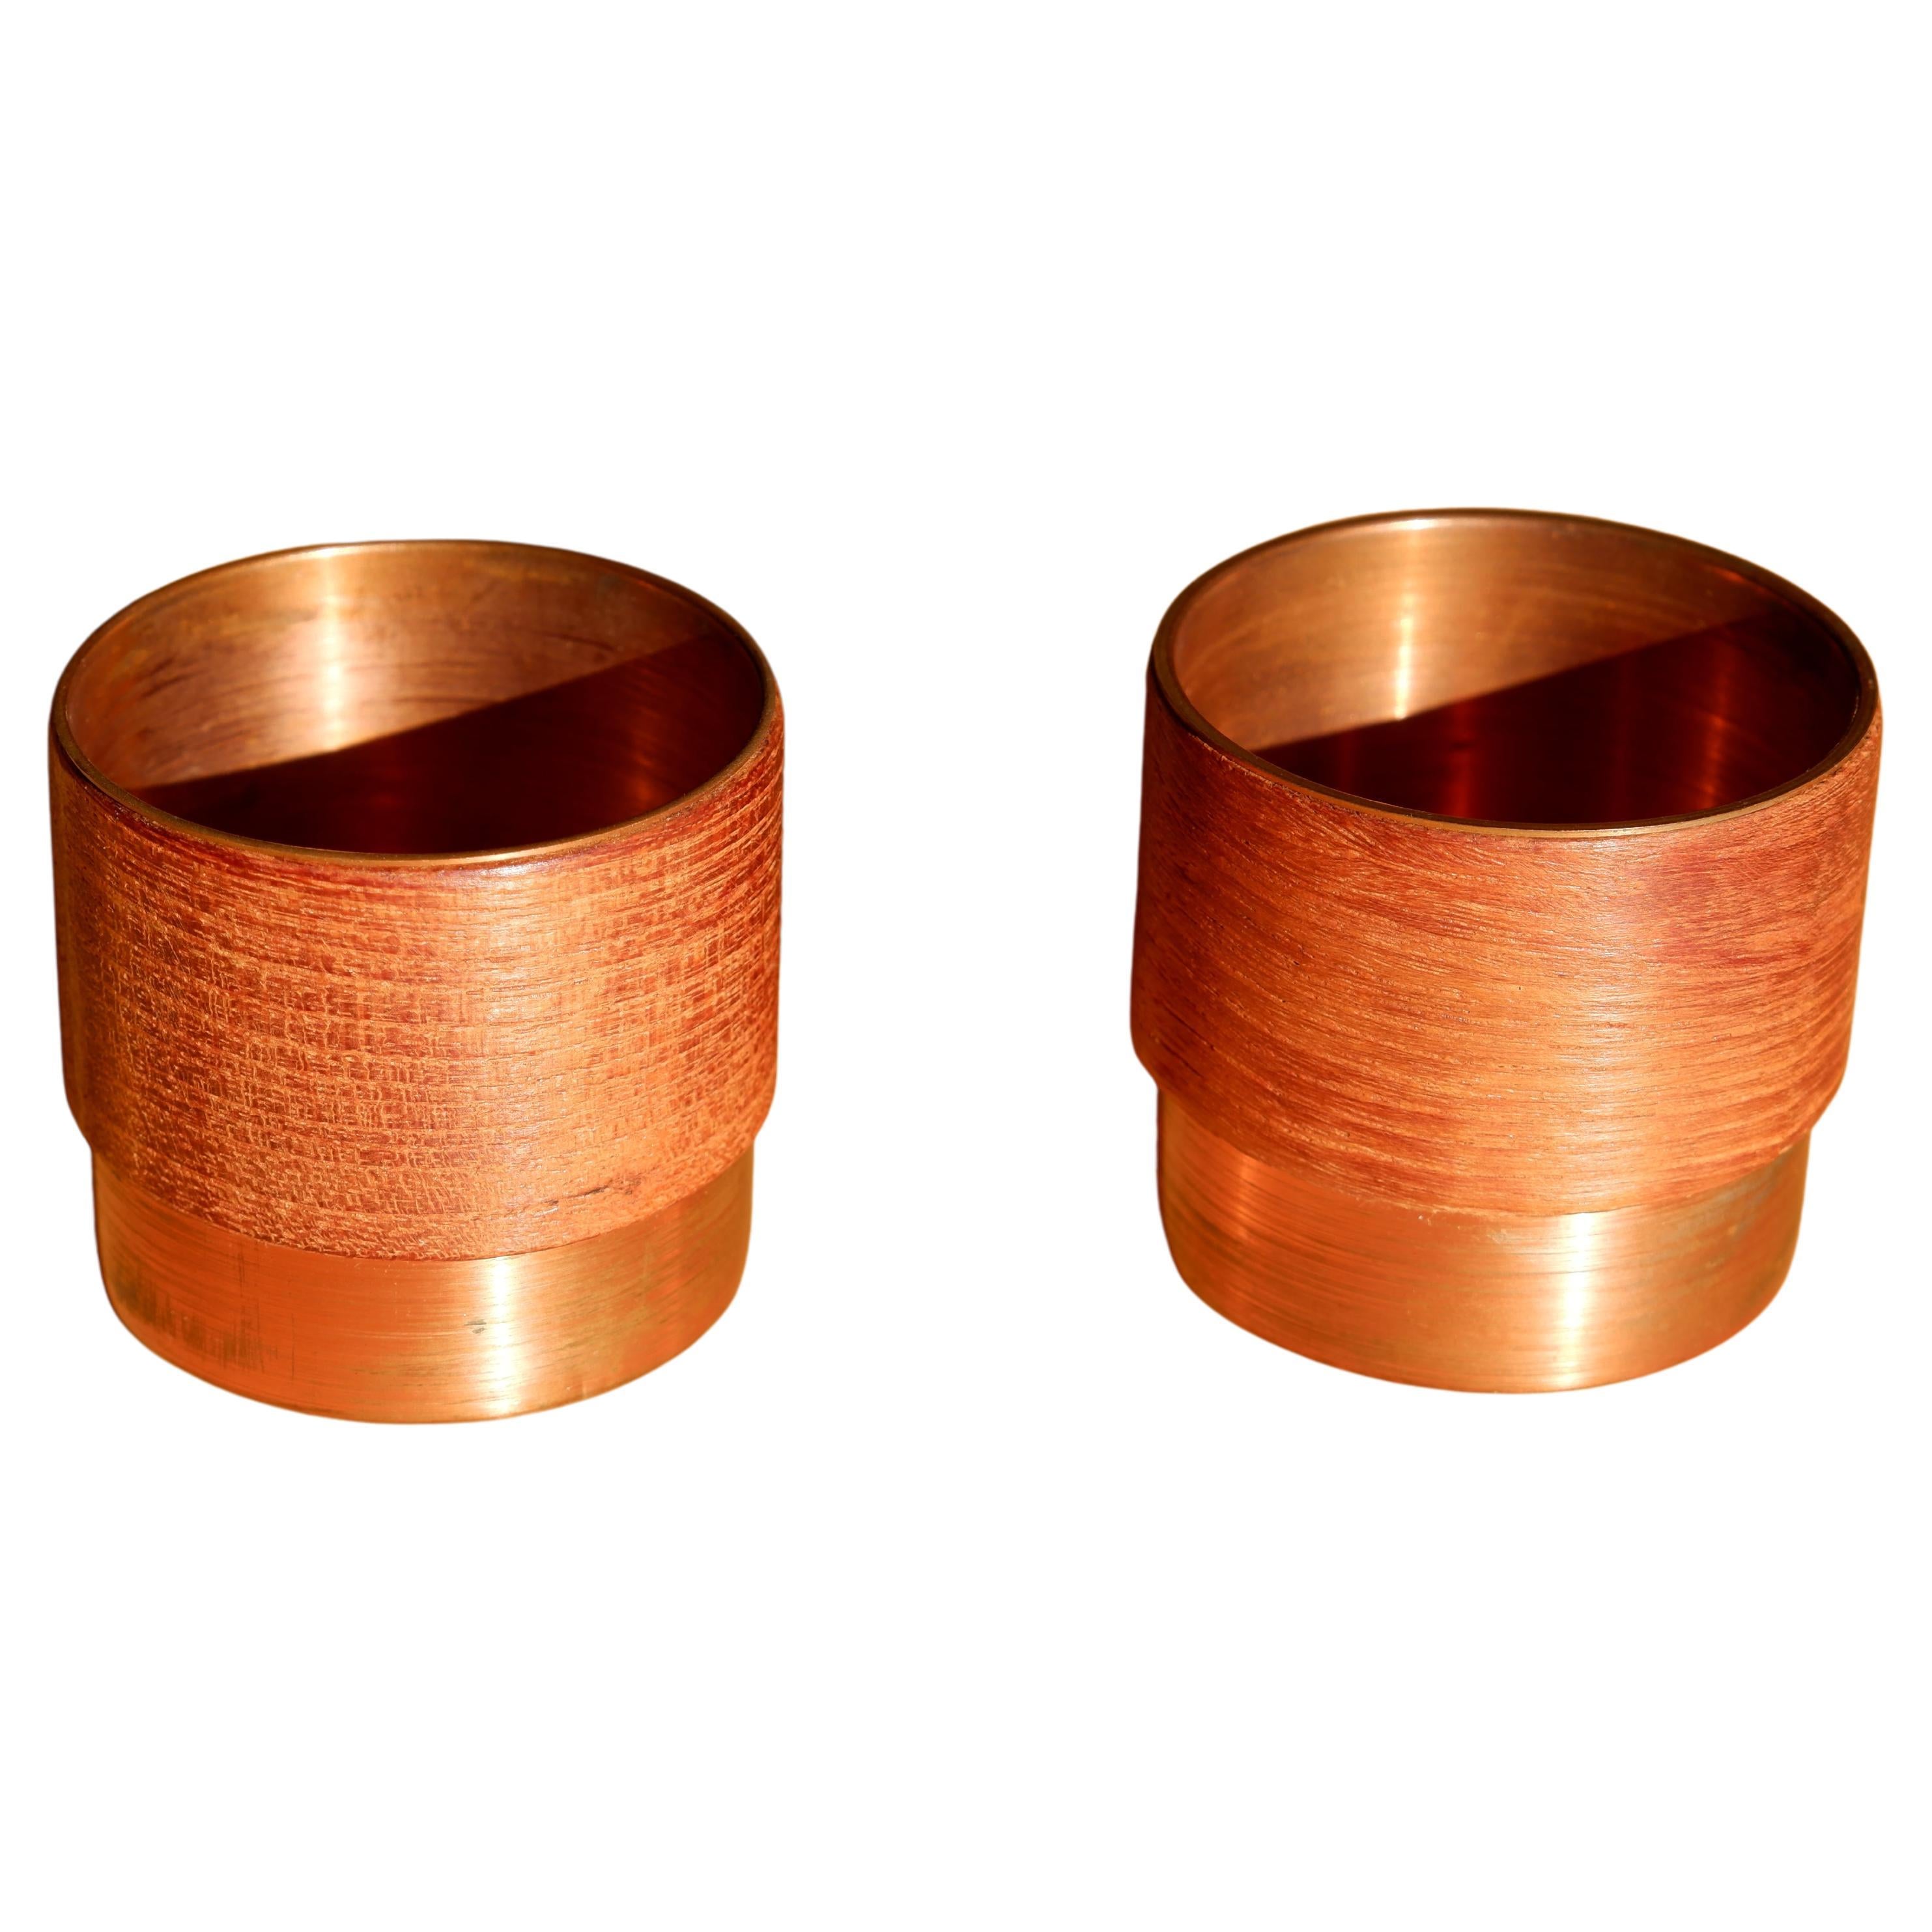 Pair of Finnish Bowls in Copper and Teak in the Style of Paavo Tynell, 60's For Sale